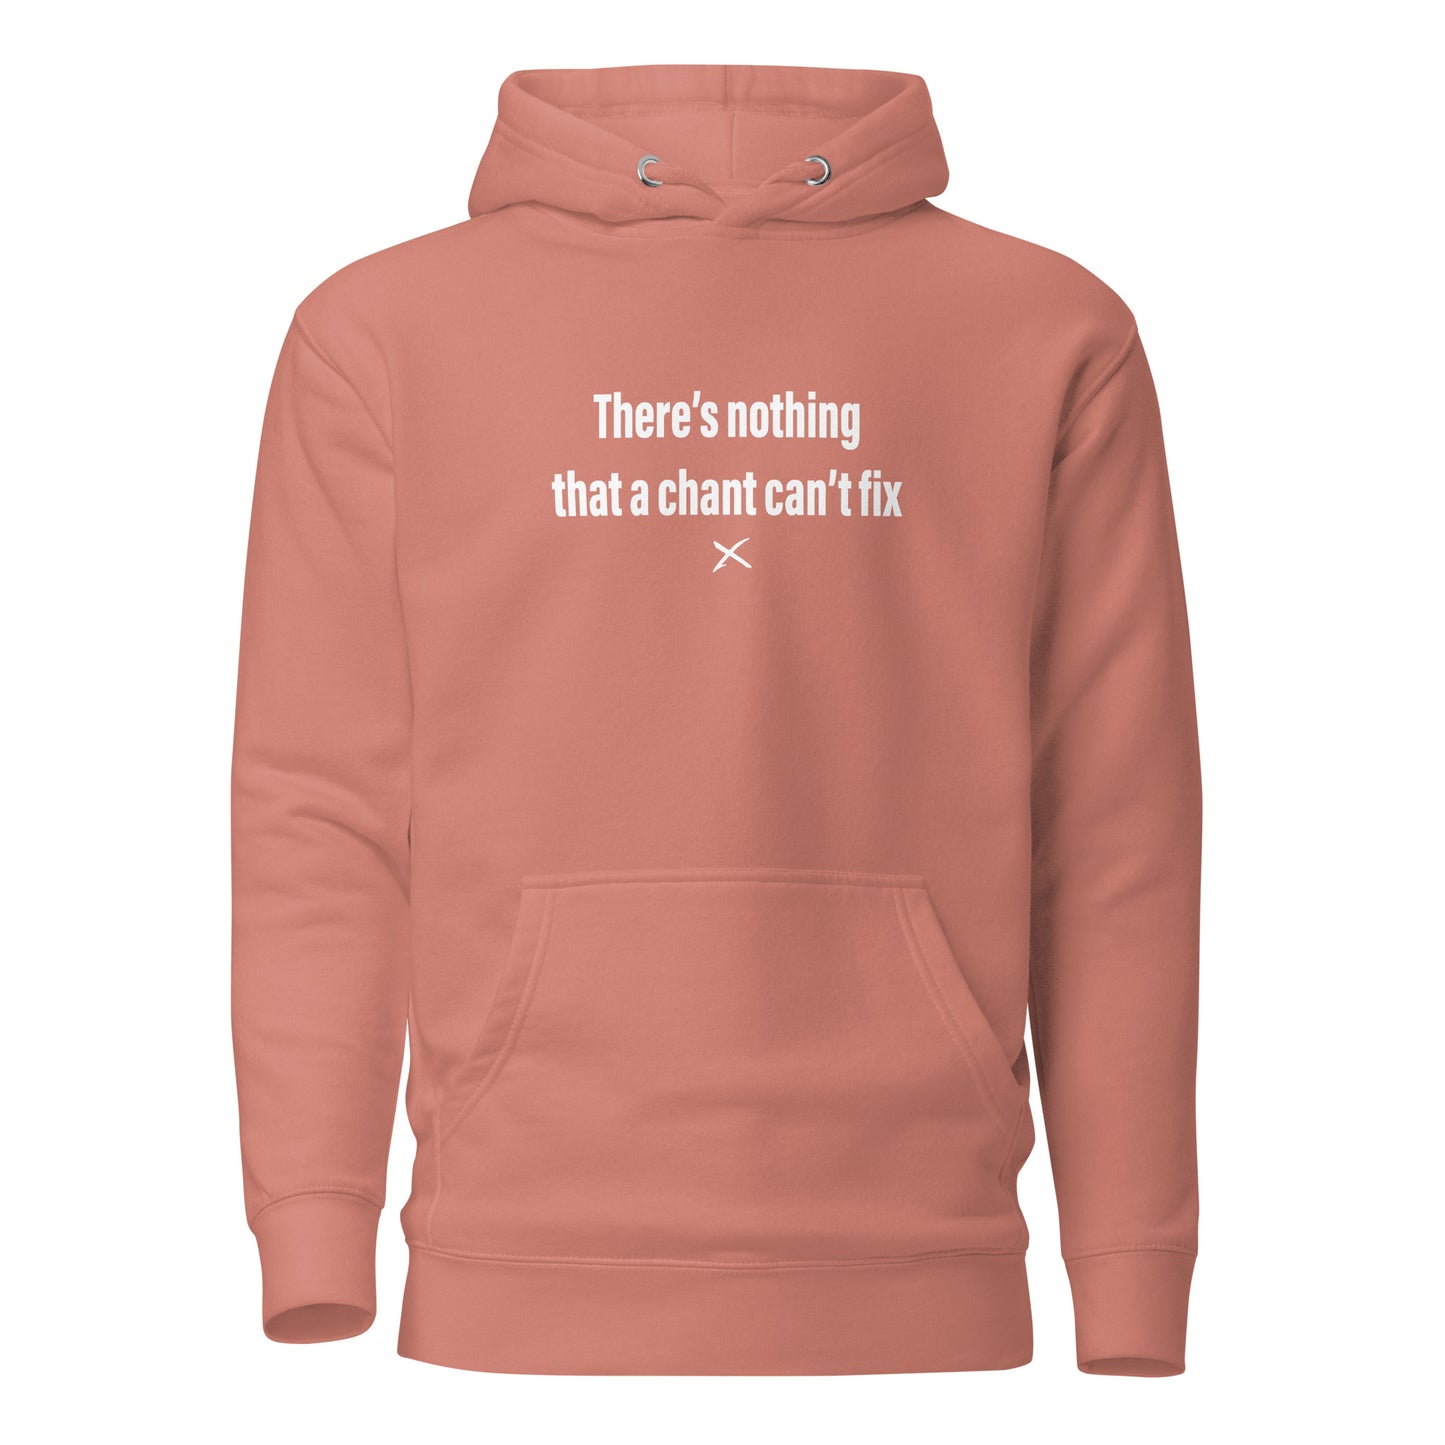 There's nothing that a chant can't fix - Hoodie